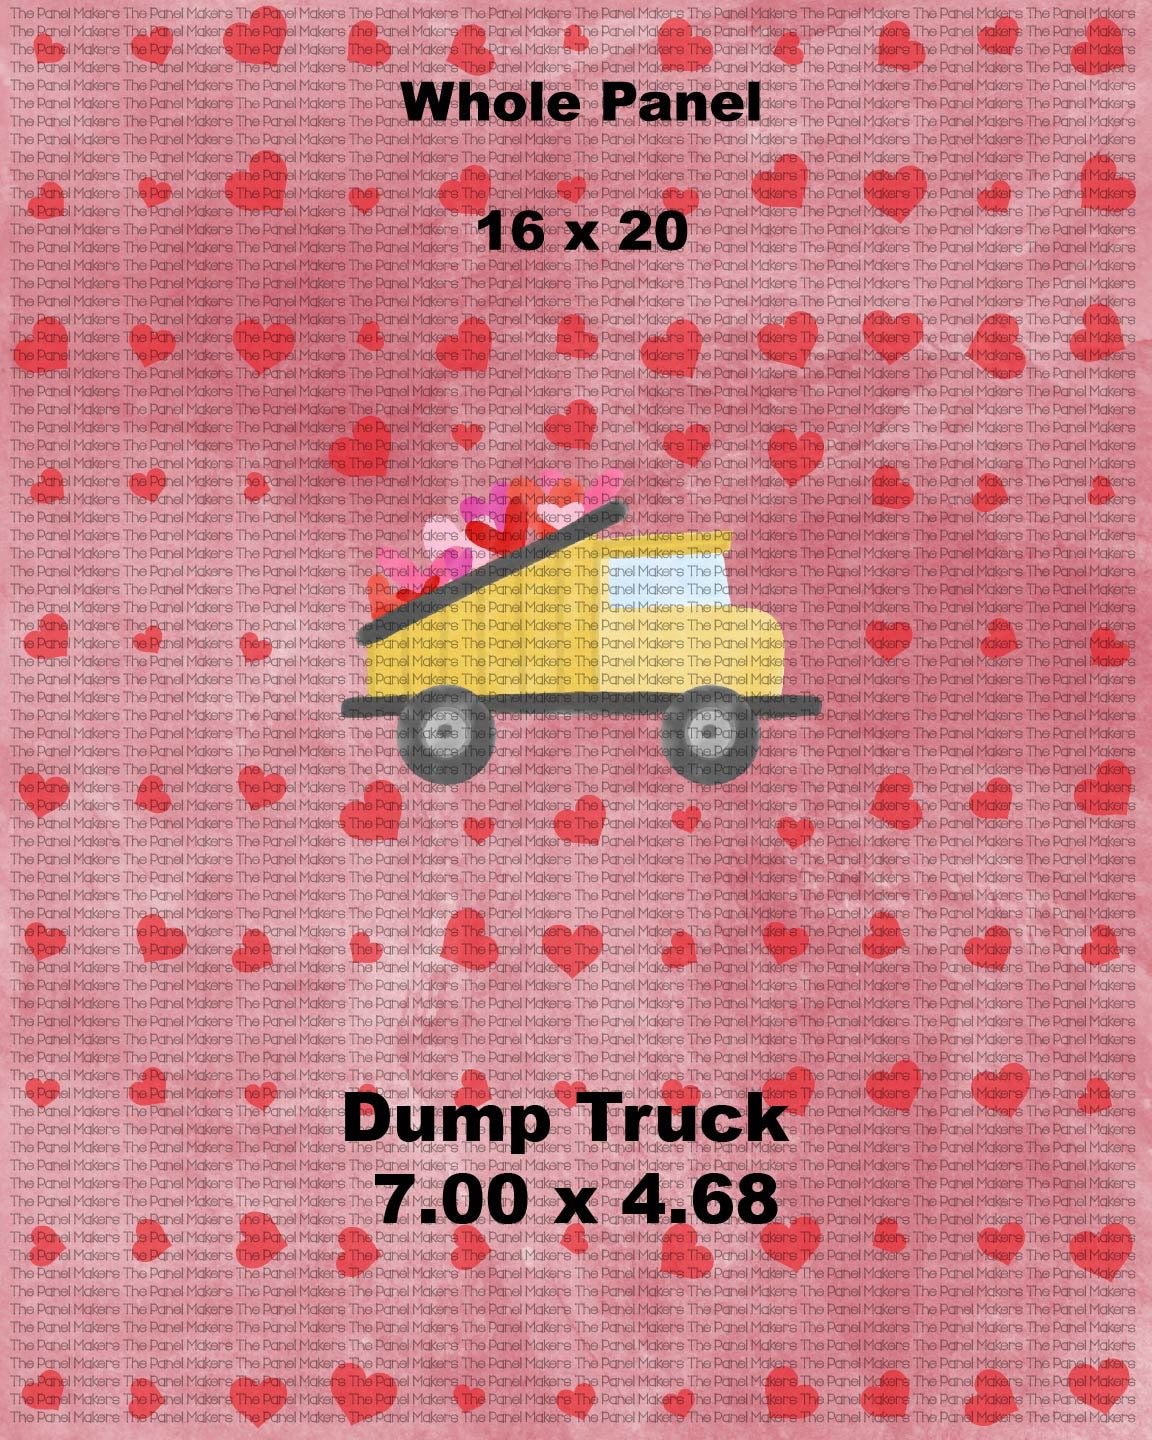 Truck of Love Large Panel